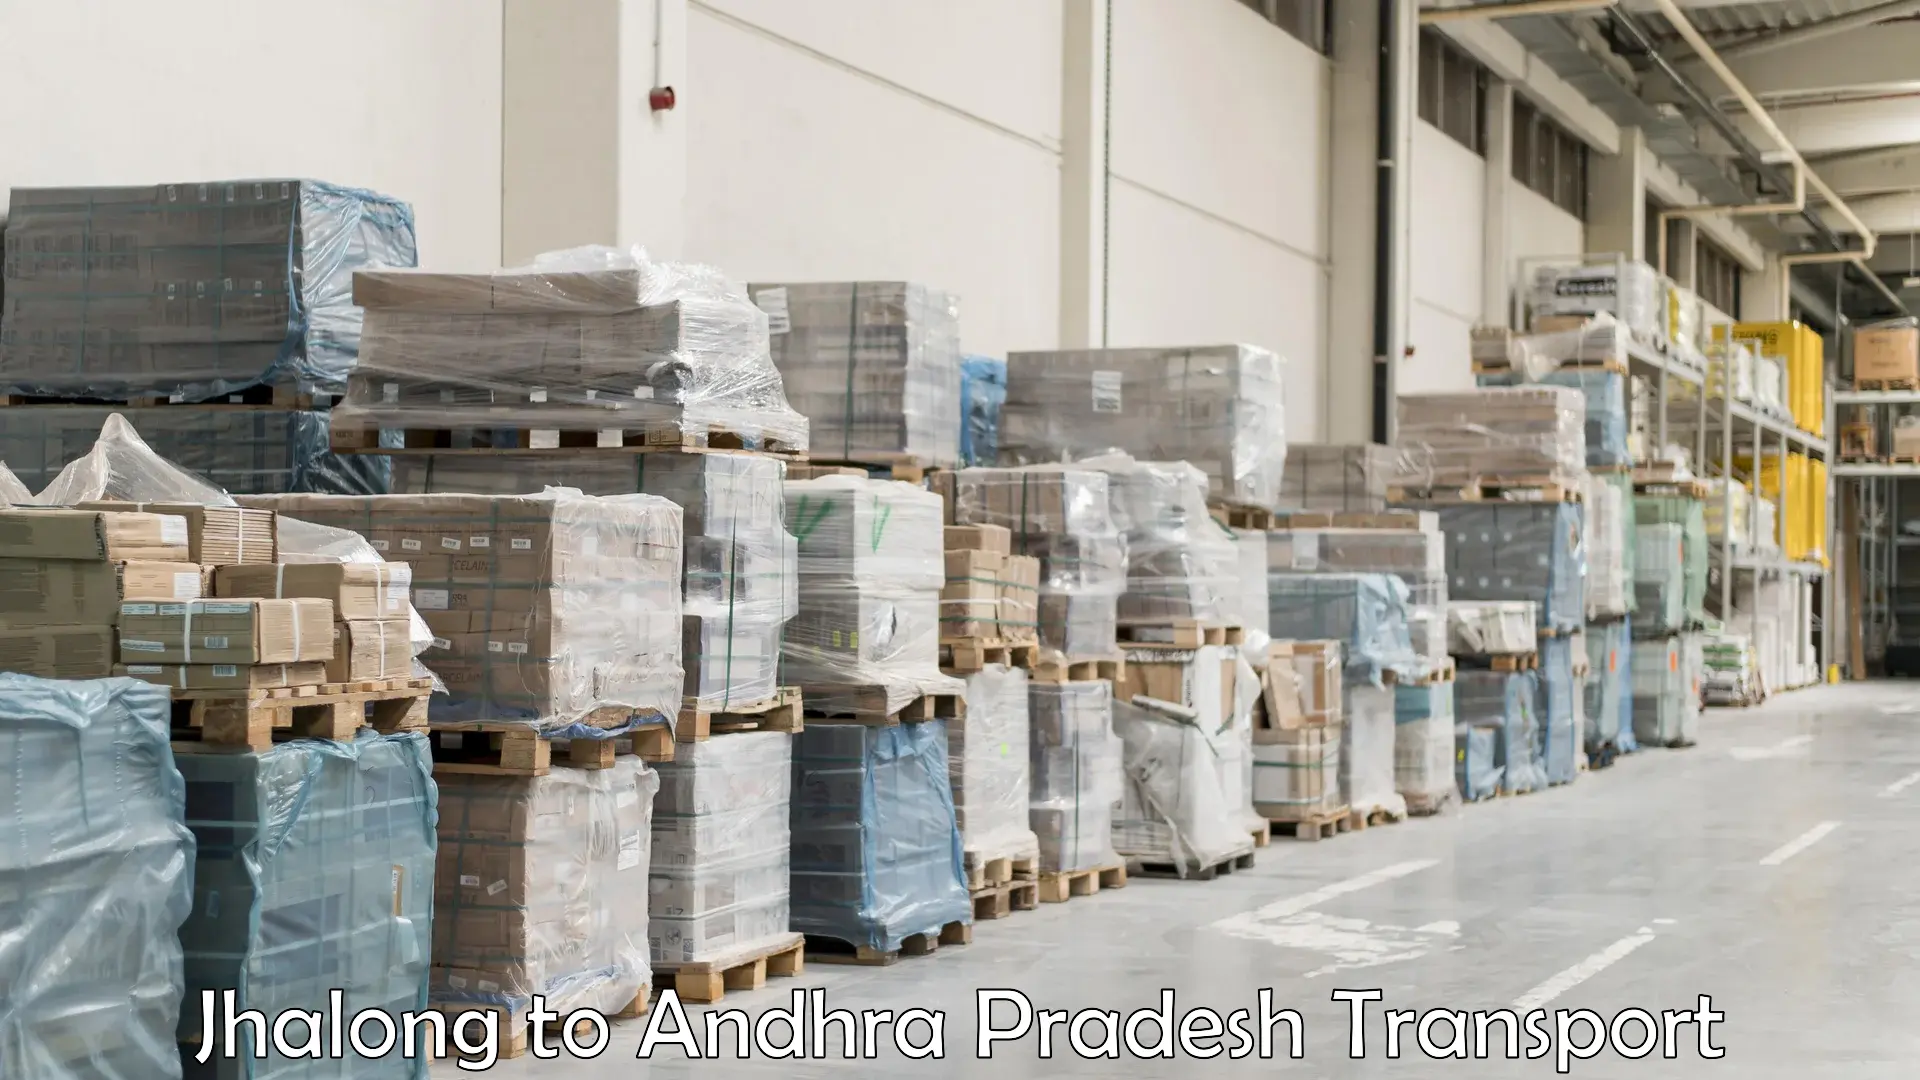 Truck transport companies in India Jhalong to Pulivendula